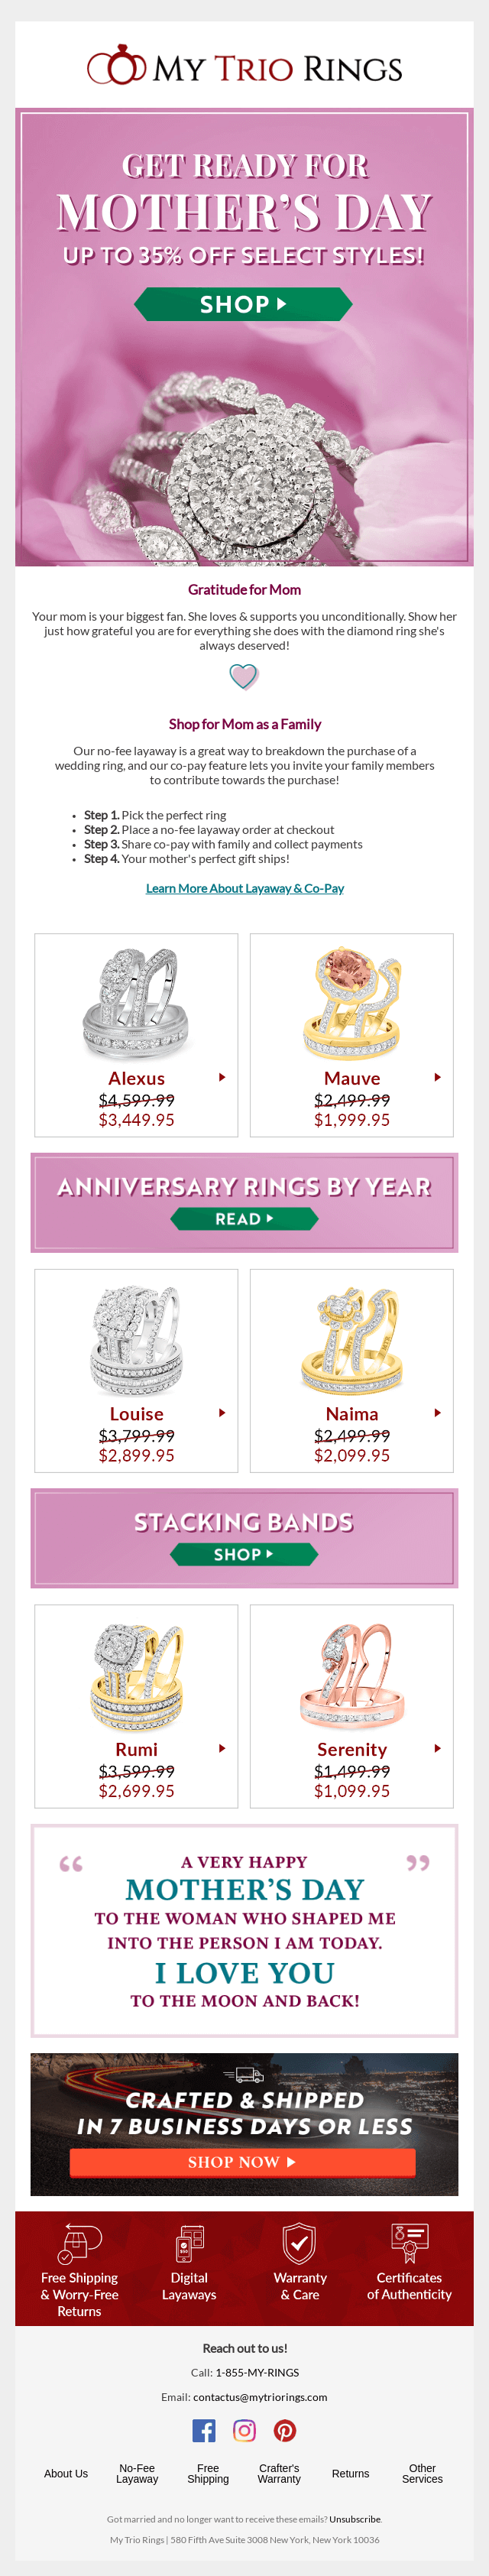 Image shows a mother’s day email campaign from My Trio Rings